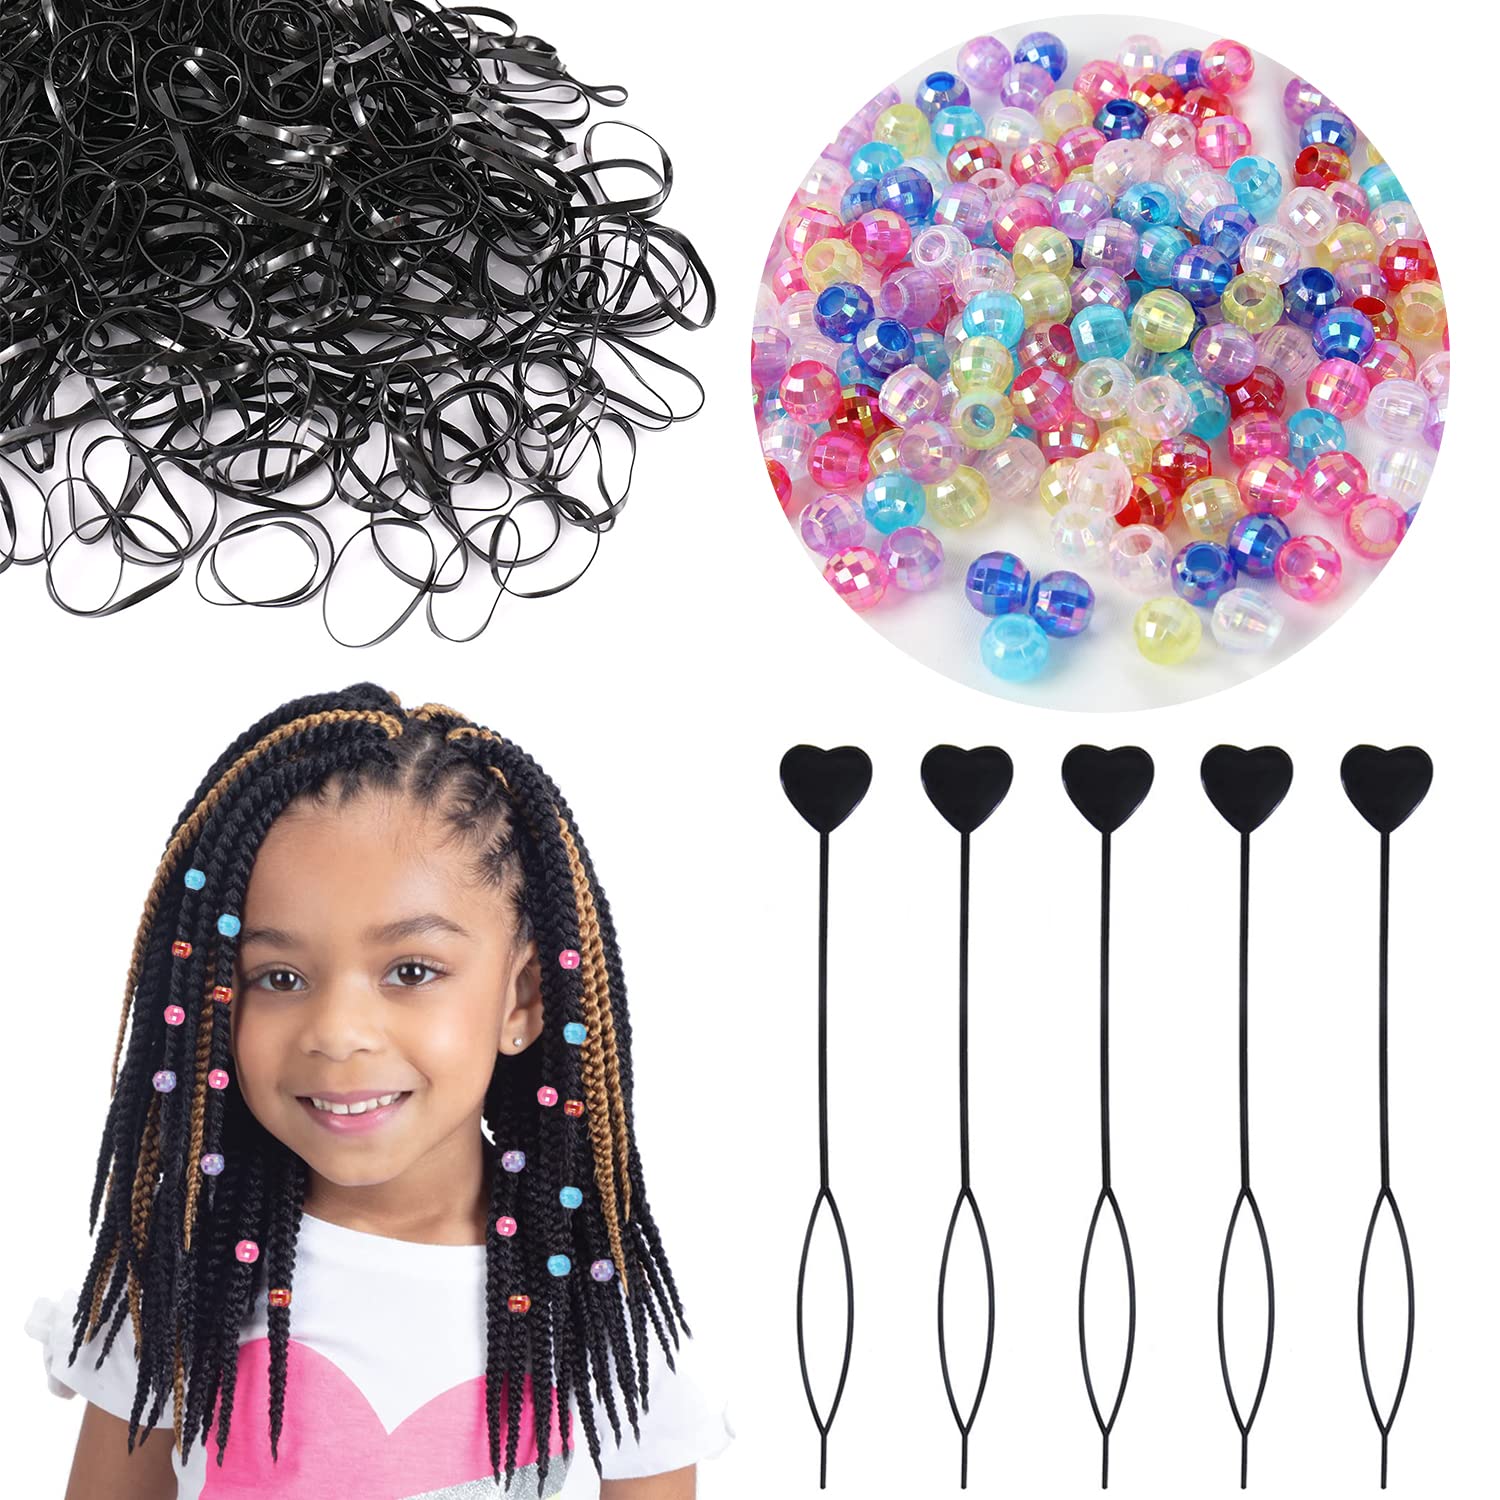 405 Pieces Hair Beads Kit Pony Beads for Kids Hair Braids